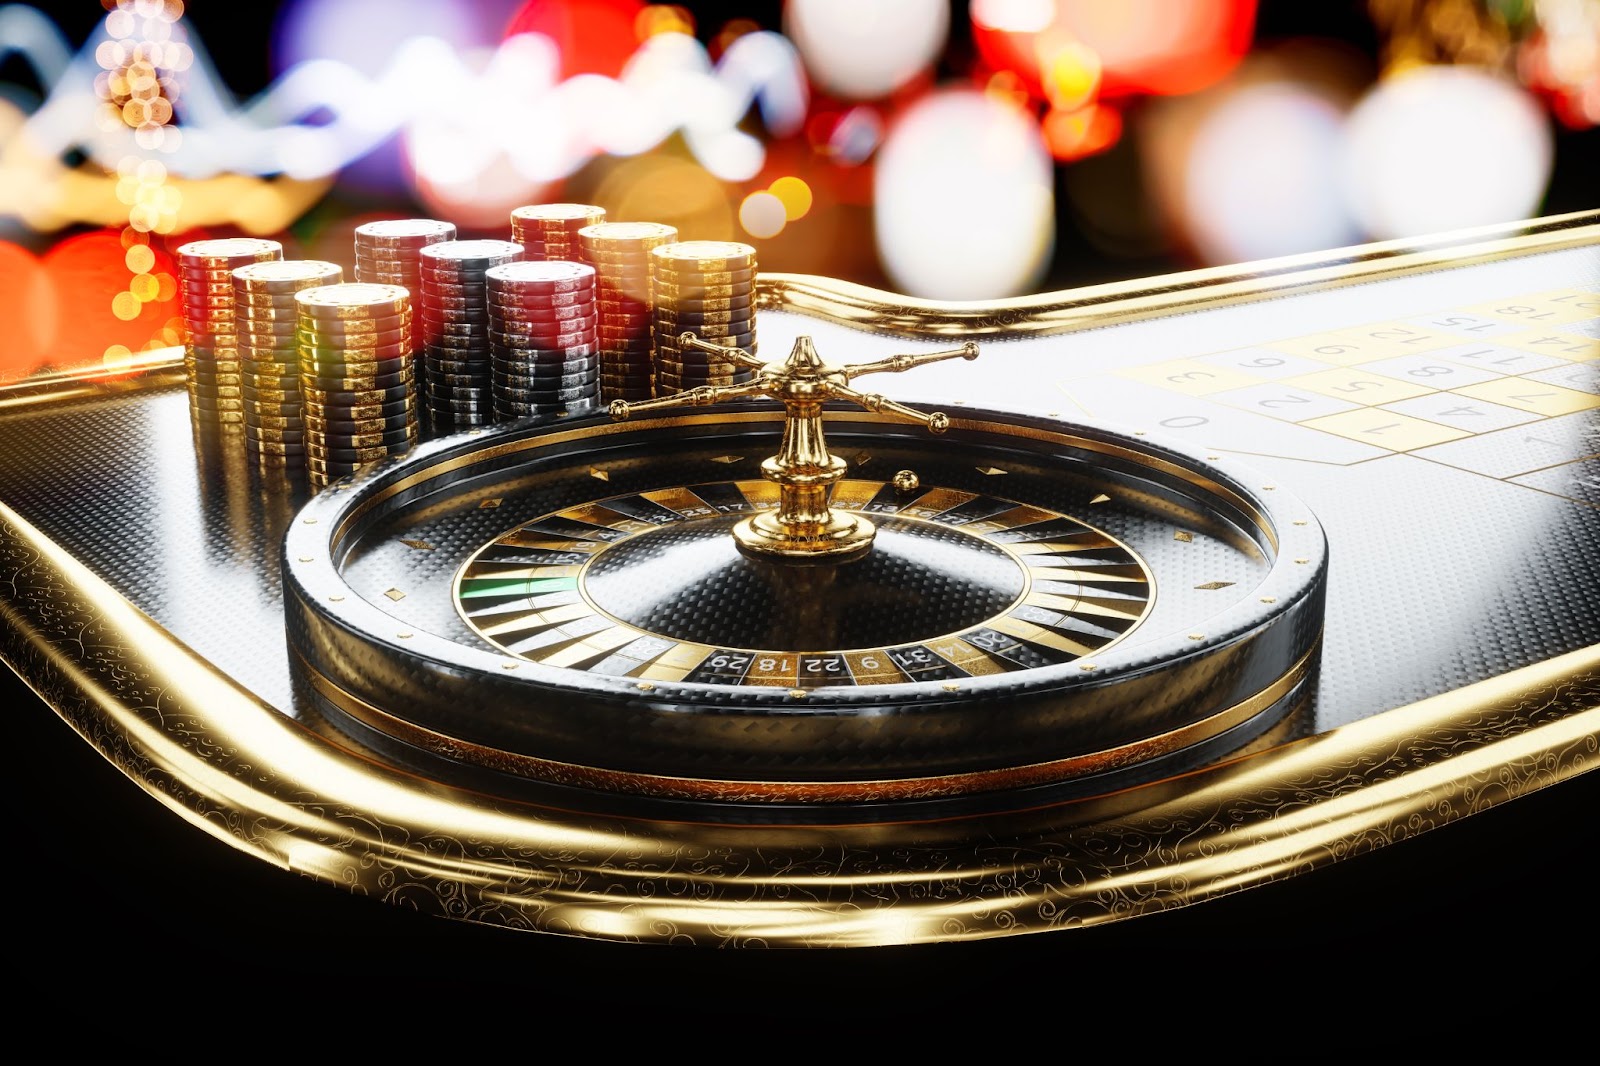 A close-up of a roulette wheel and betting table with stacks of casino chips, set against a backdrop of colorful bokeh lights.